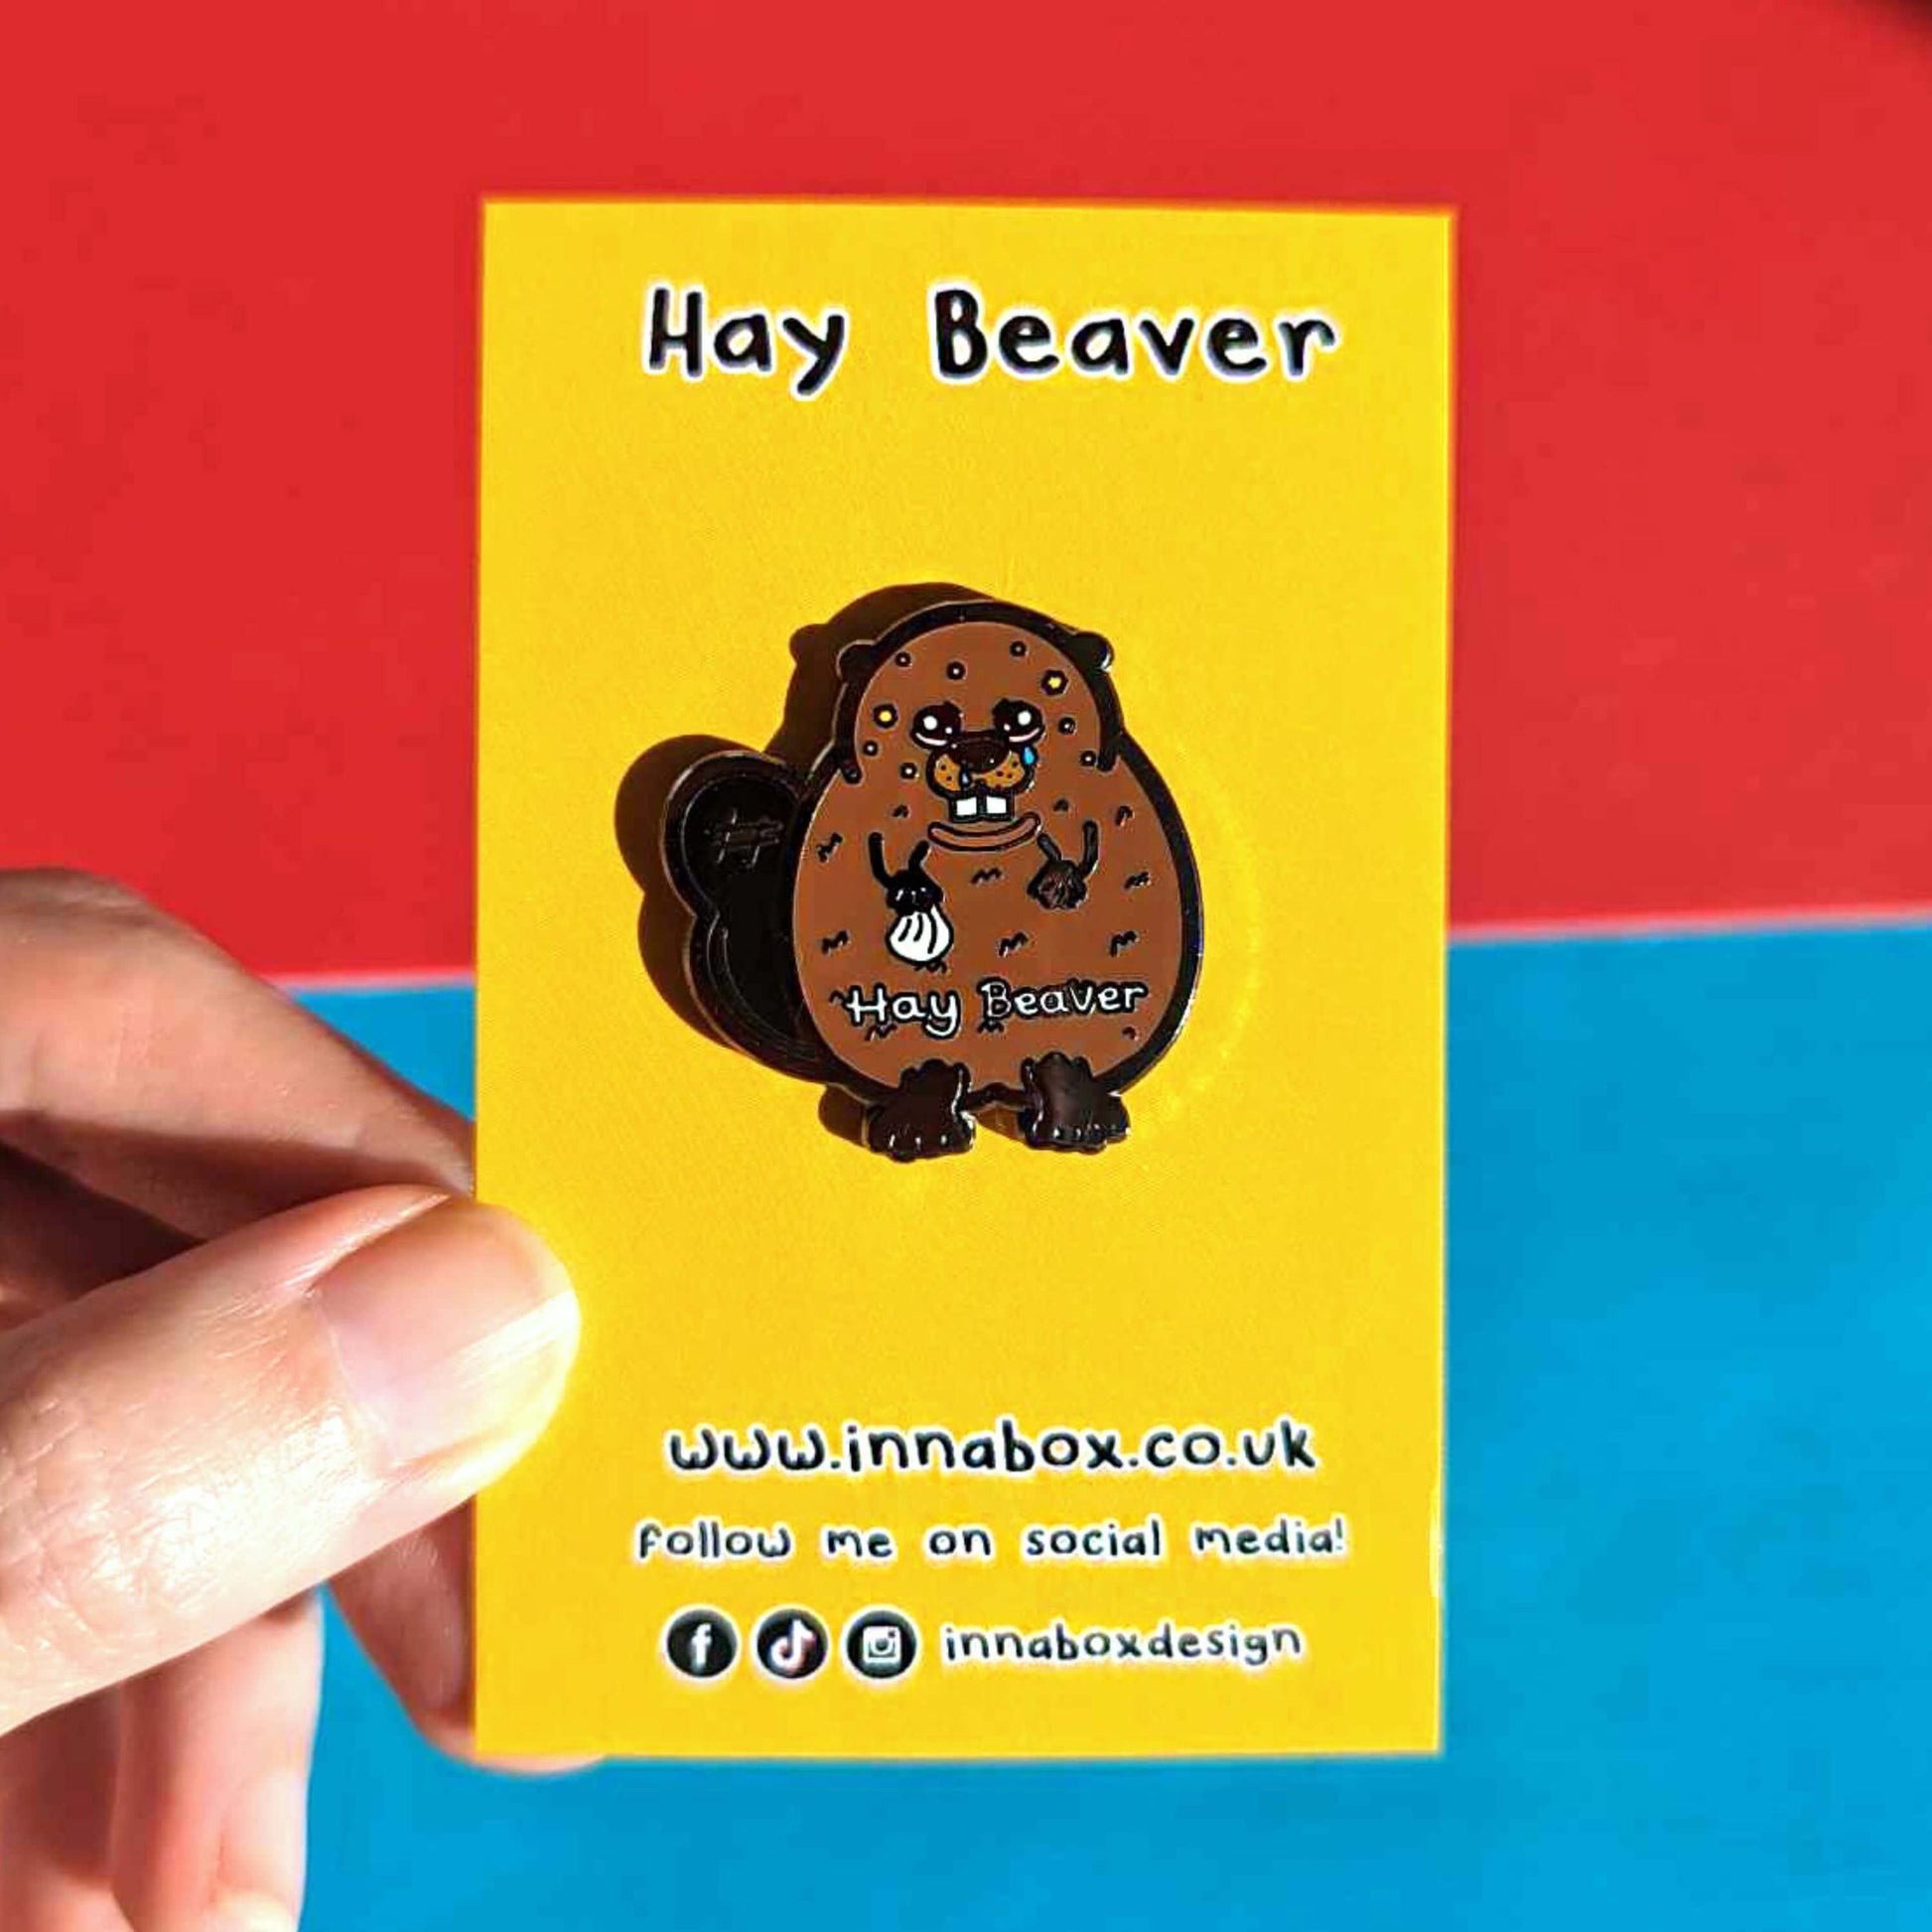 Hay Beaver Enamel Pin - Hay Fever on yellow backing card held in front of blue and red background. The enamel pin is a brown beaver with watery eyes, dripping nose and yellow spots on face and is holding a tissue with it's little hand. Hay beaver is written across its belly. The enamel pin is designed to raise awareness for hay fever or allergic rhinitis